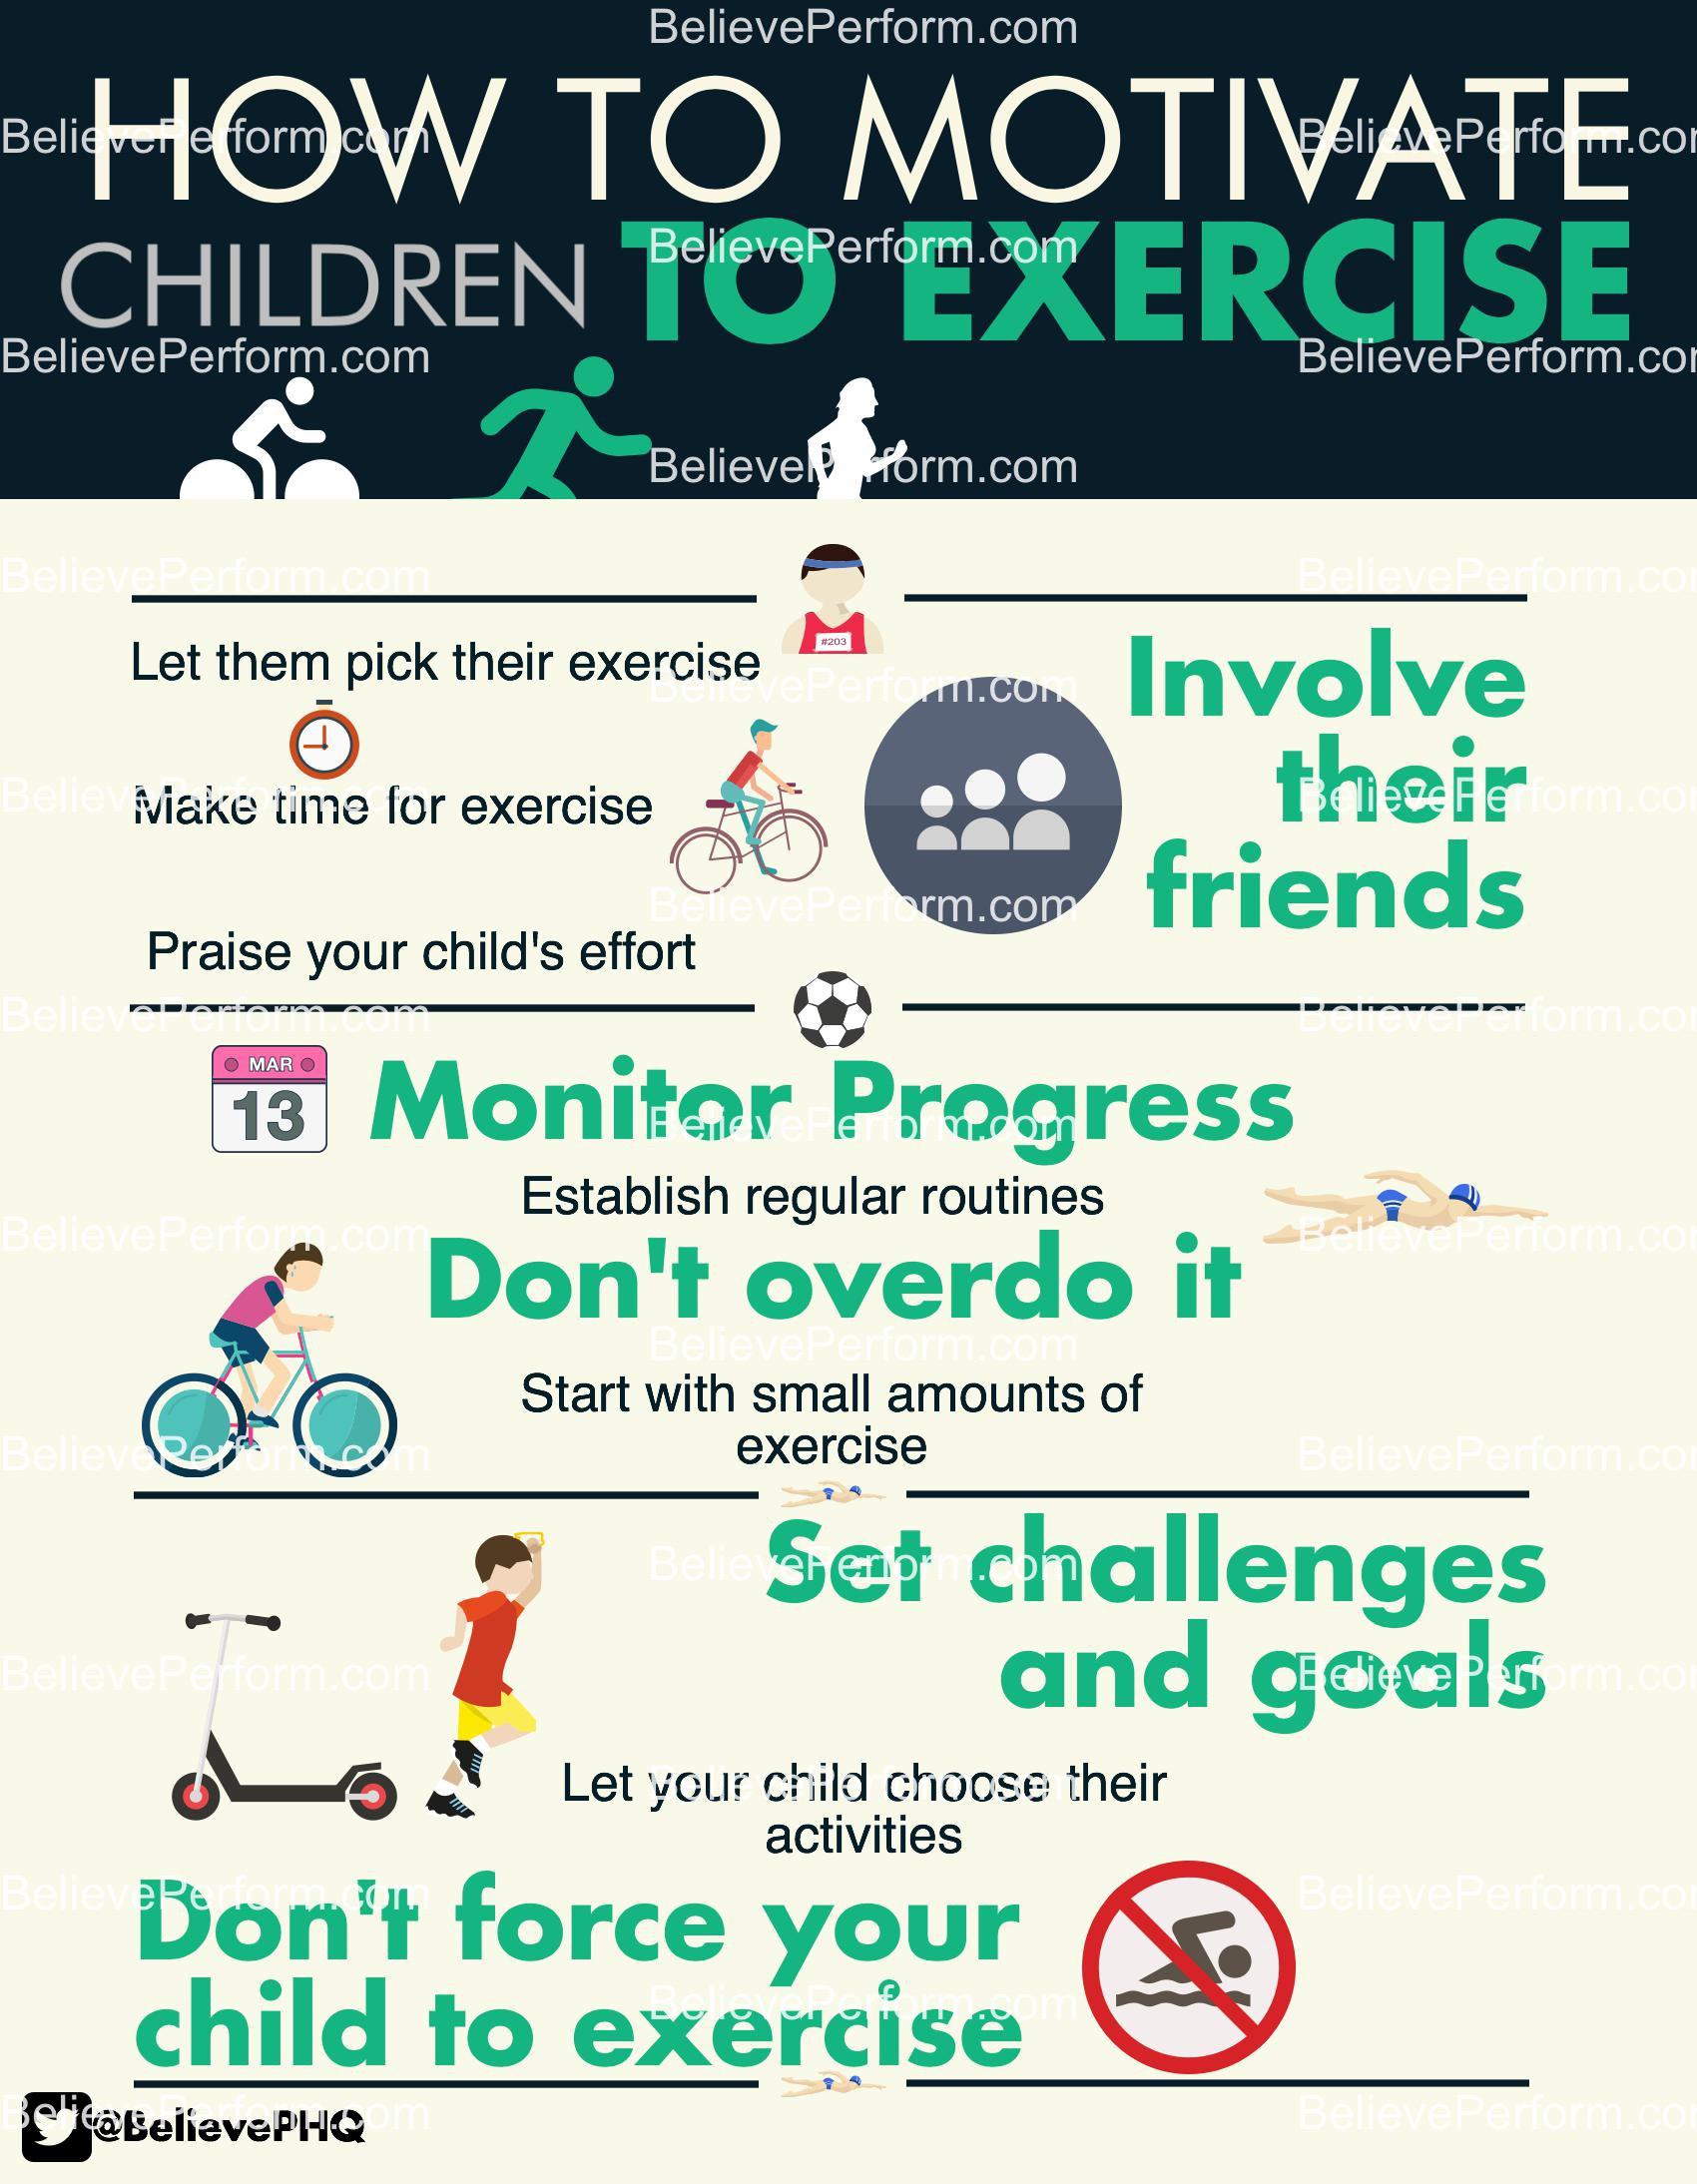 Why sport and exercise is important for children - BelievePerform